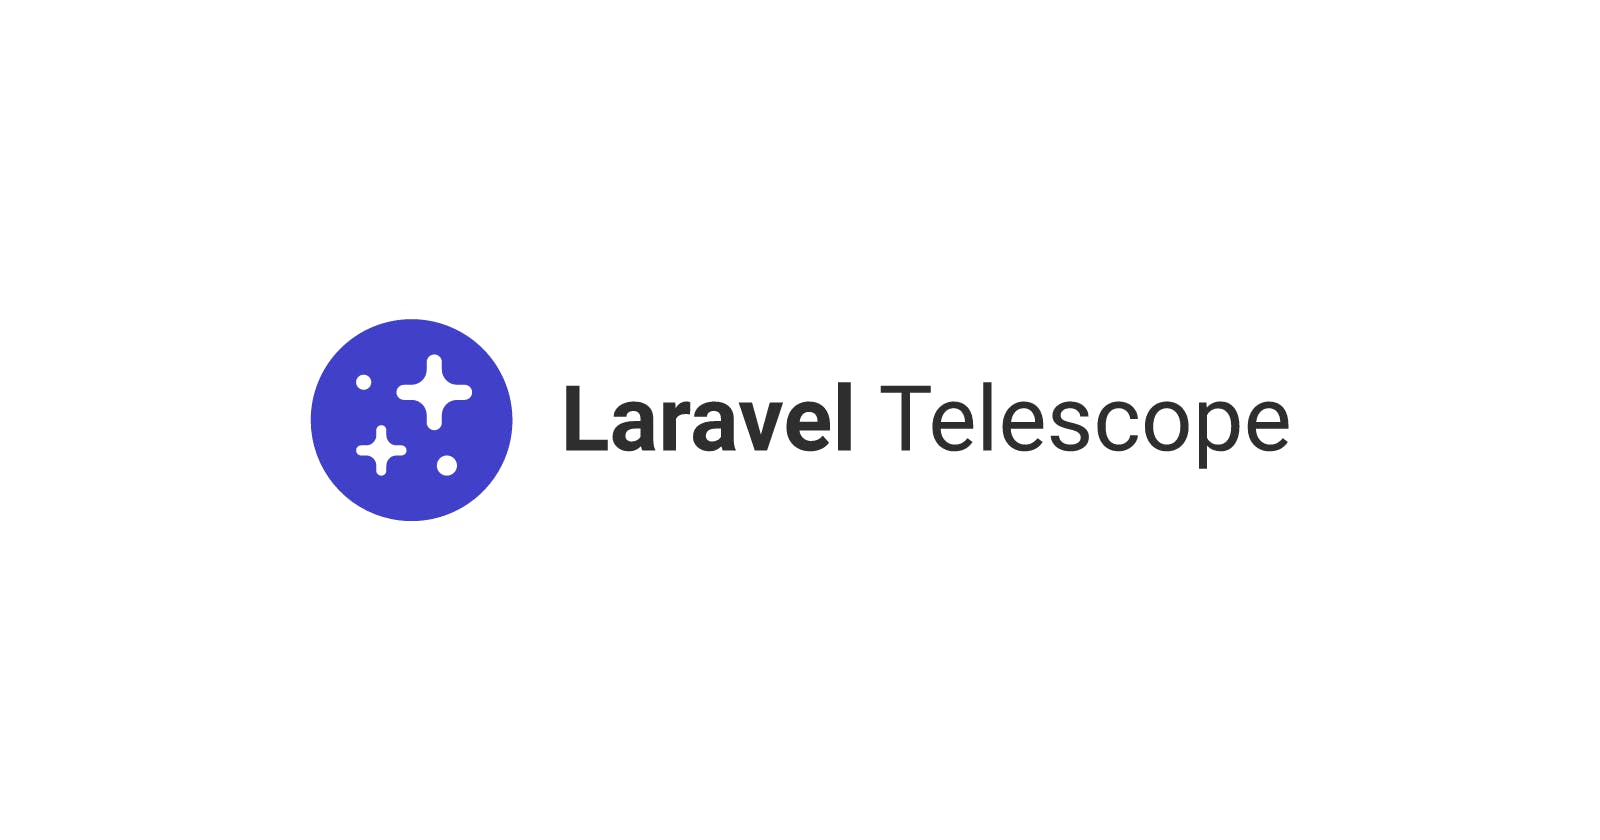 Laravel Telescope: Important Helpful Tool You Need to Know More About